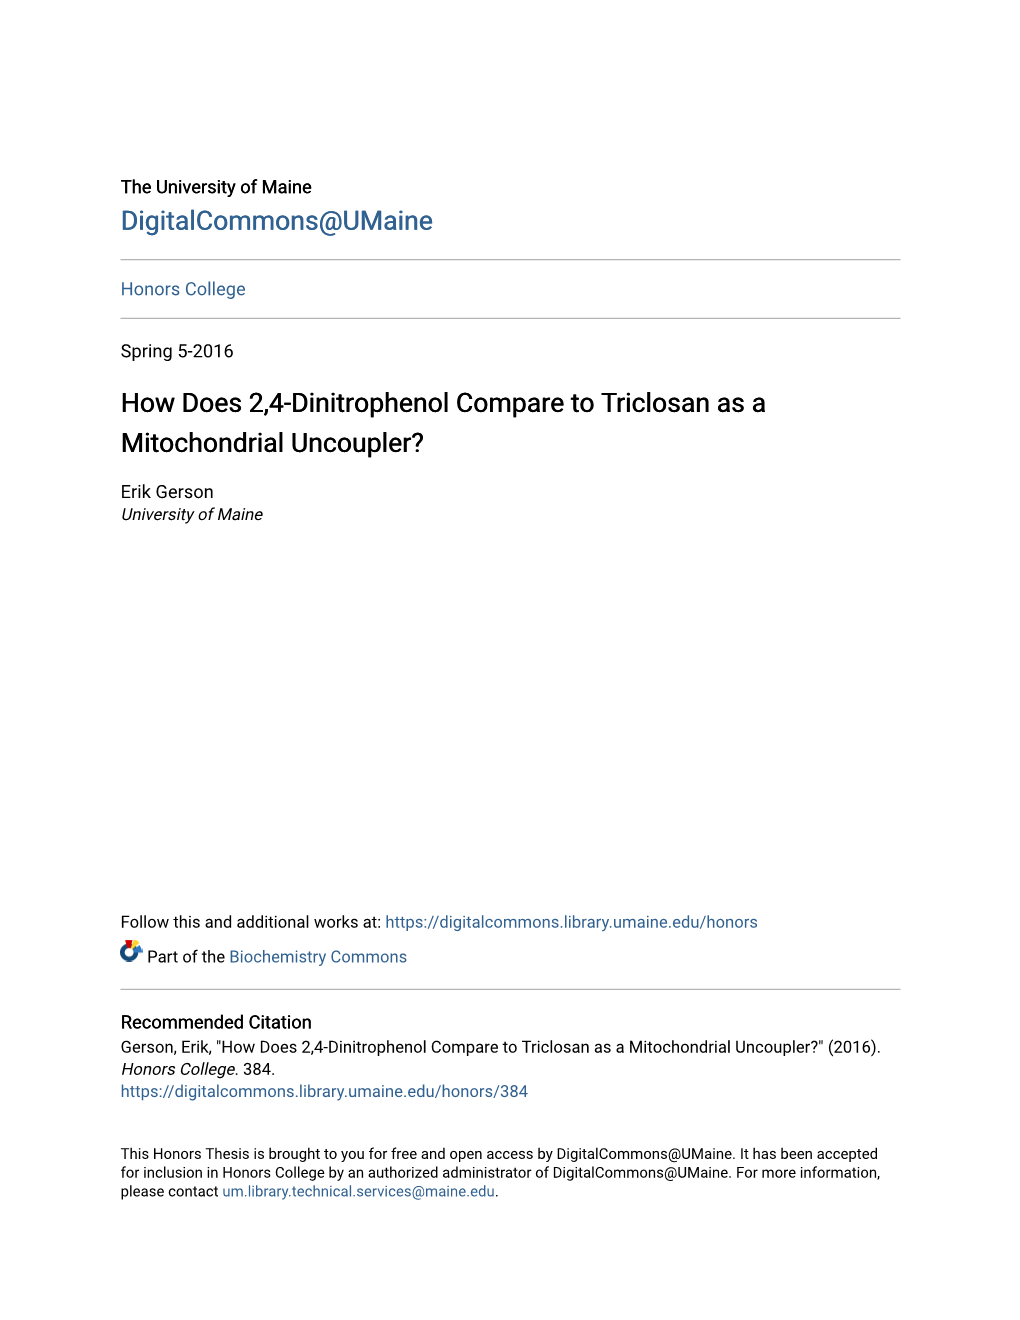 How Does 2,4-Dinitrophenol Compare to Triclosan As a Mitochondrial Uncoupler?